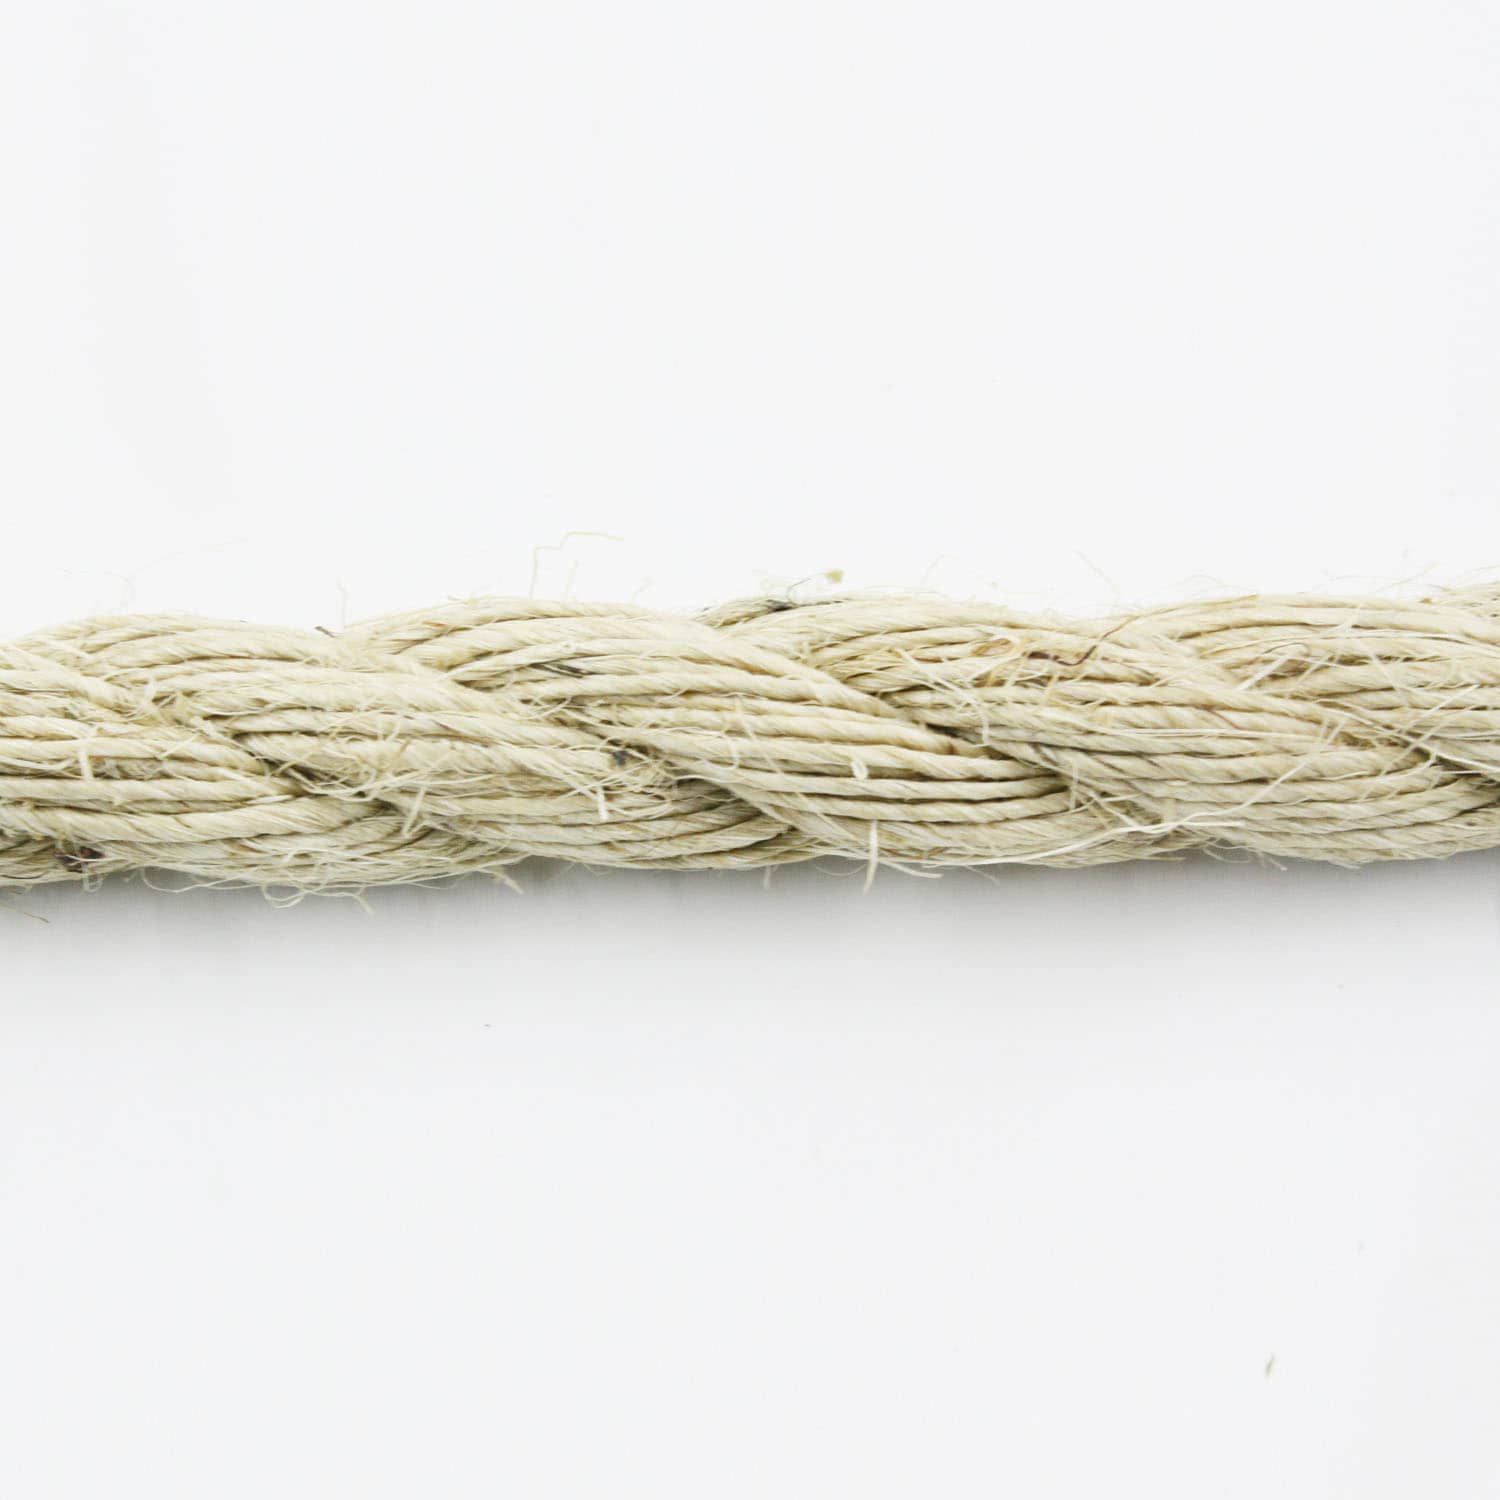 Tug of War Rope 1.25 inch × 25 feet, White Twisted Cotton Rope Natural  Thick Rope for Hanging, Swing, Landscaping, Nautical